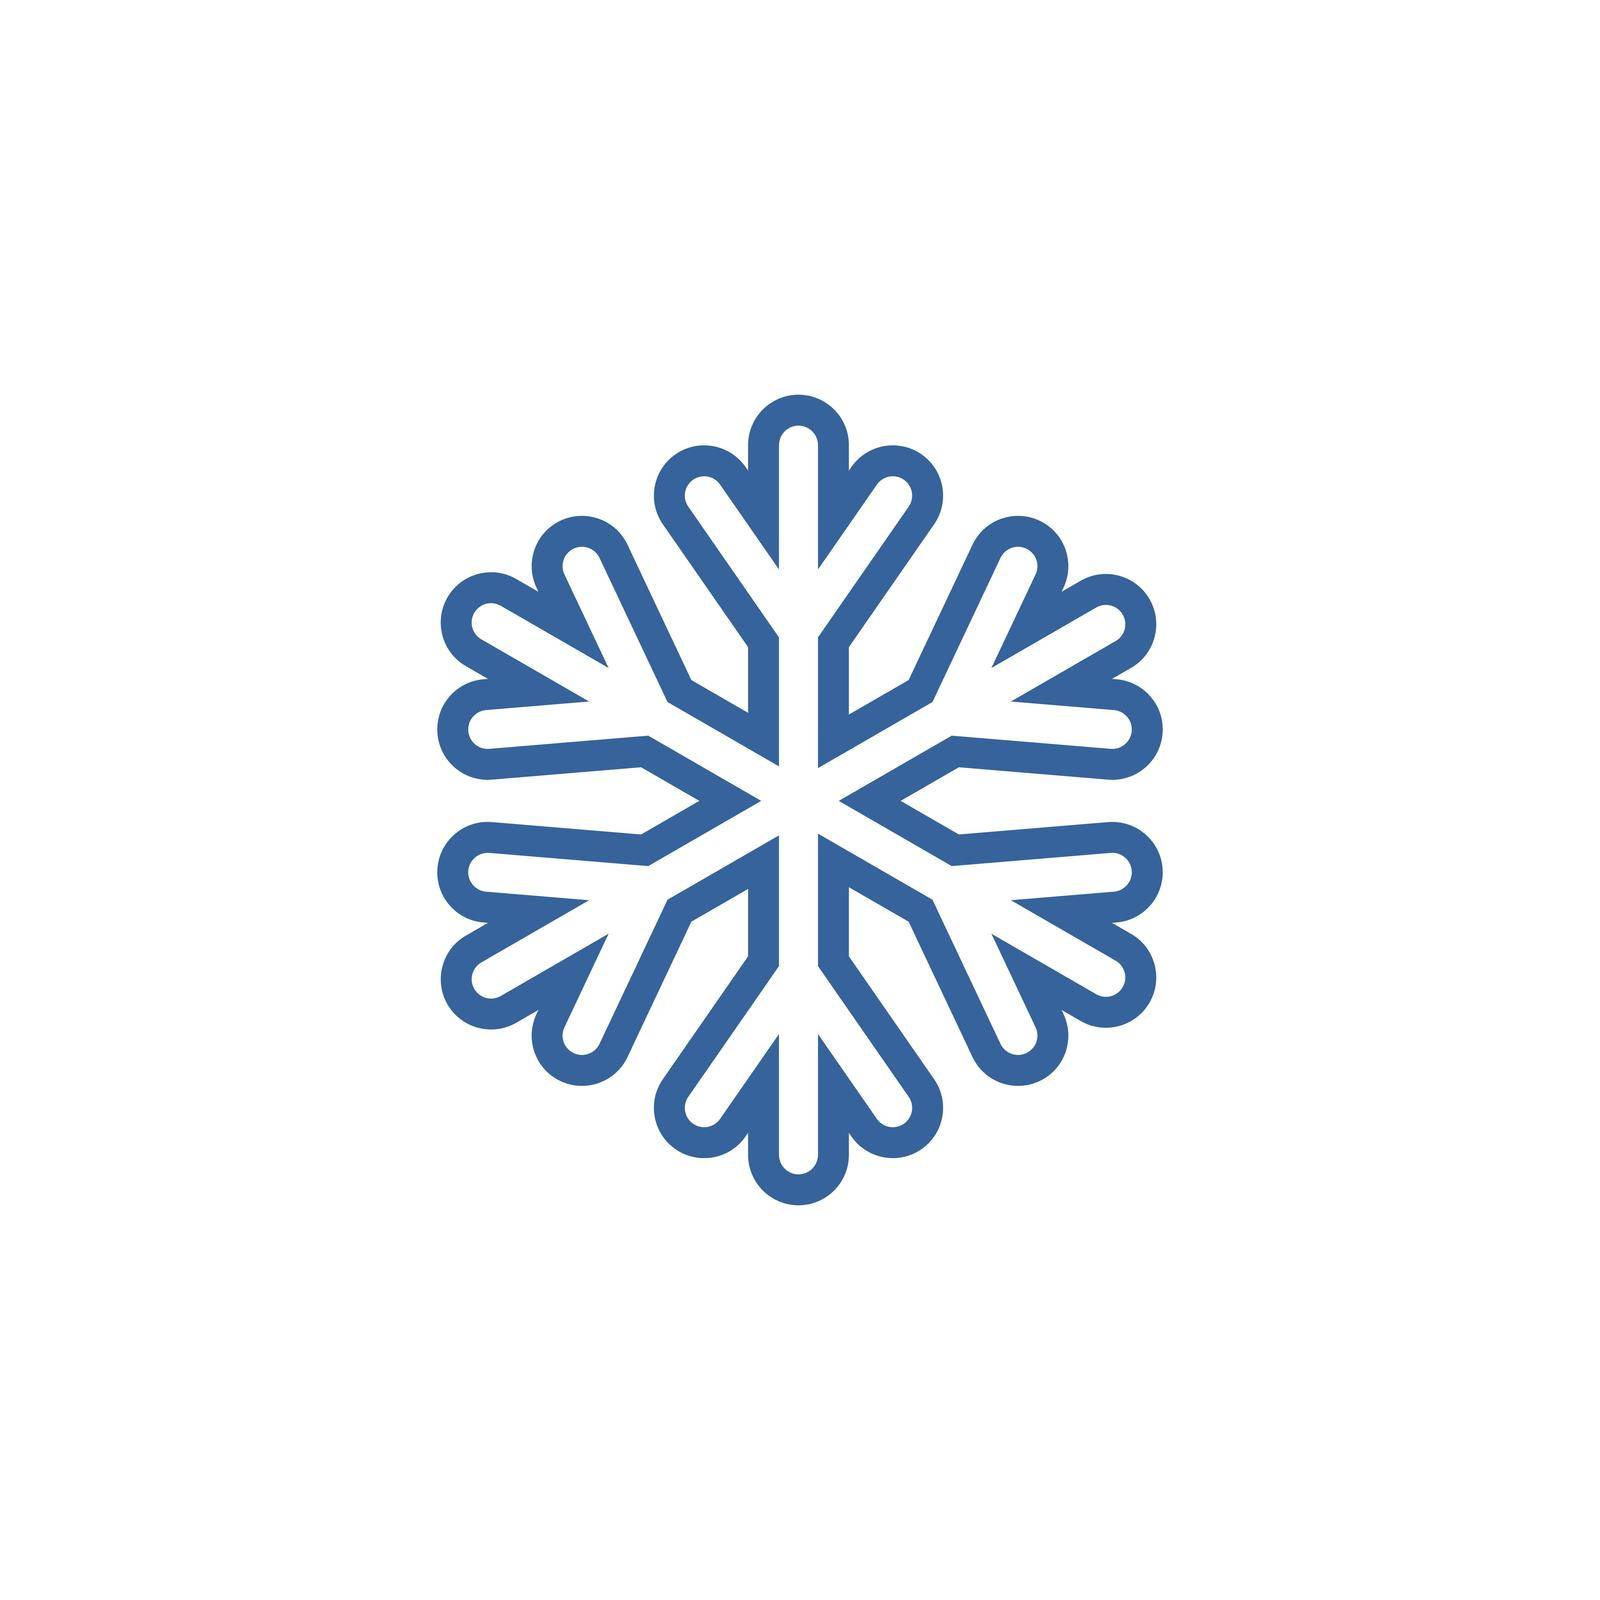 Snowflakes isolated vector icon. Meteorology sign. Graph symbol for travel, tourism and weather web site and apps design, logo, app, UI